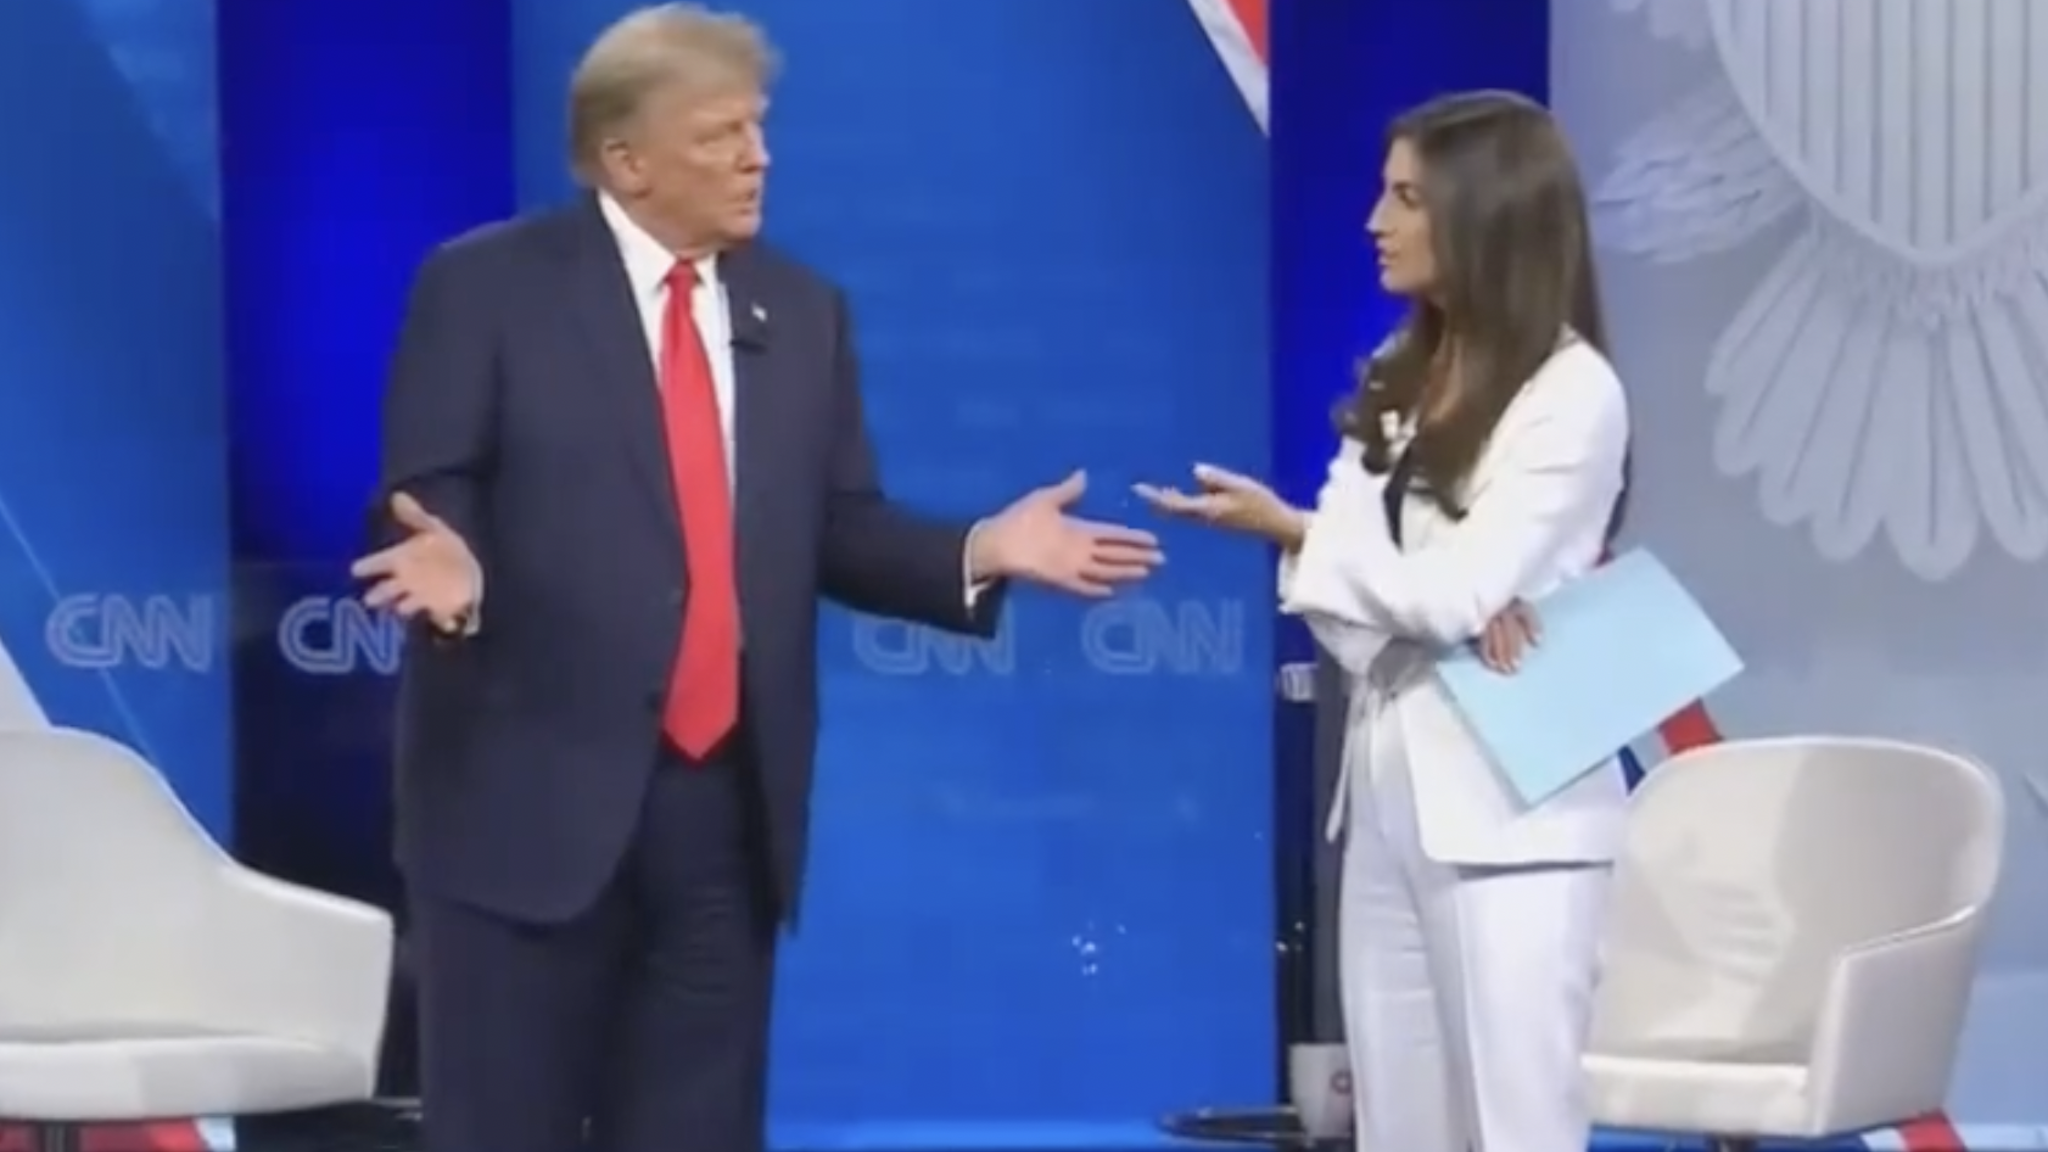 Donald Trump spars with CNN anchor Kaitlan Collins at town hall